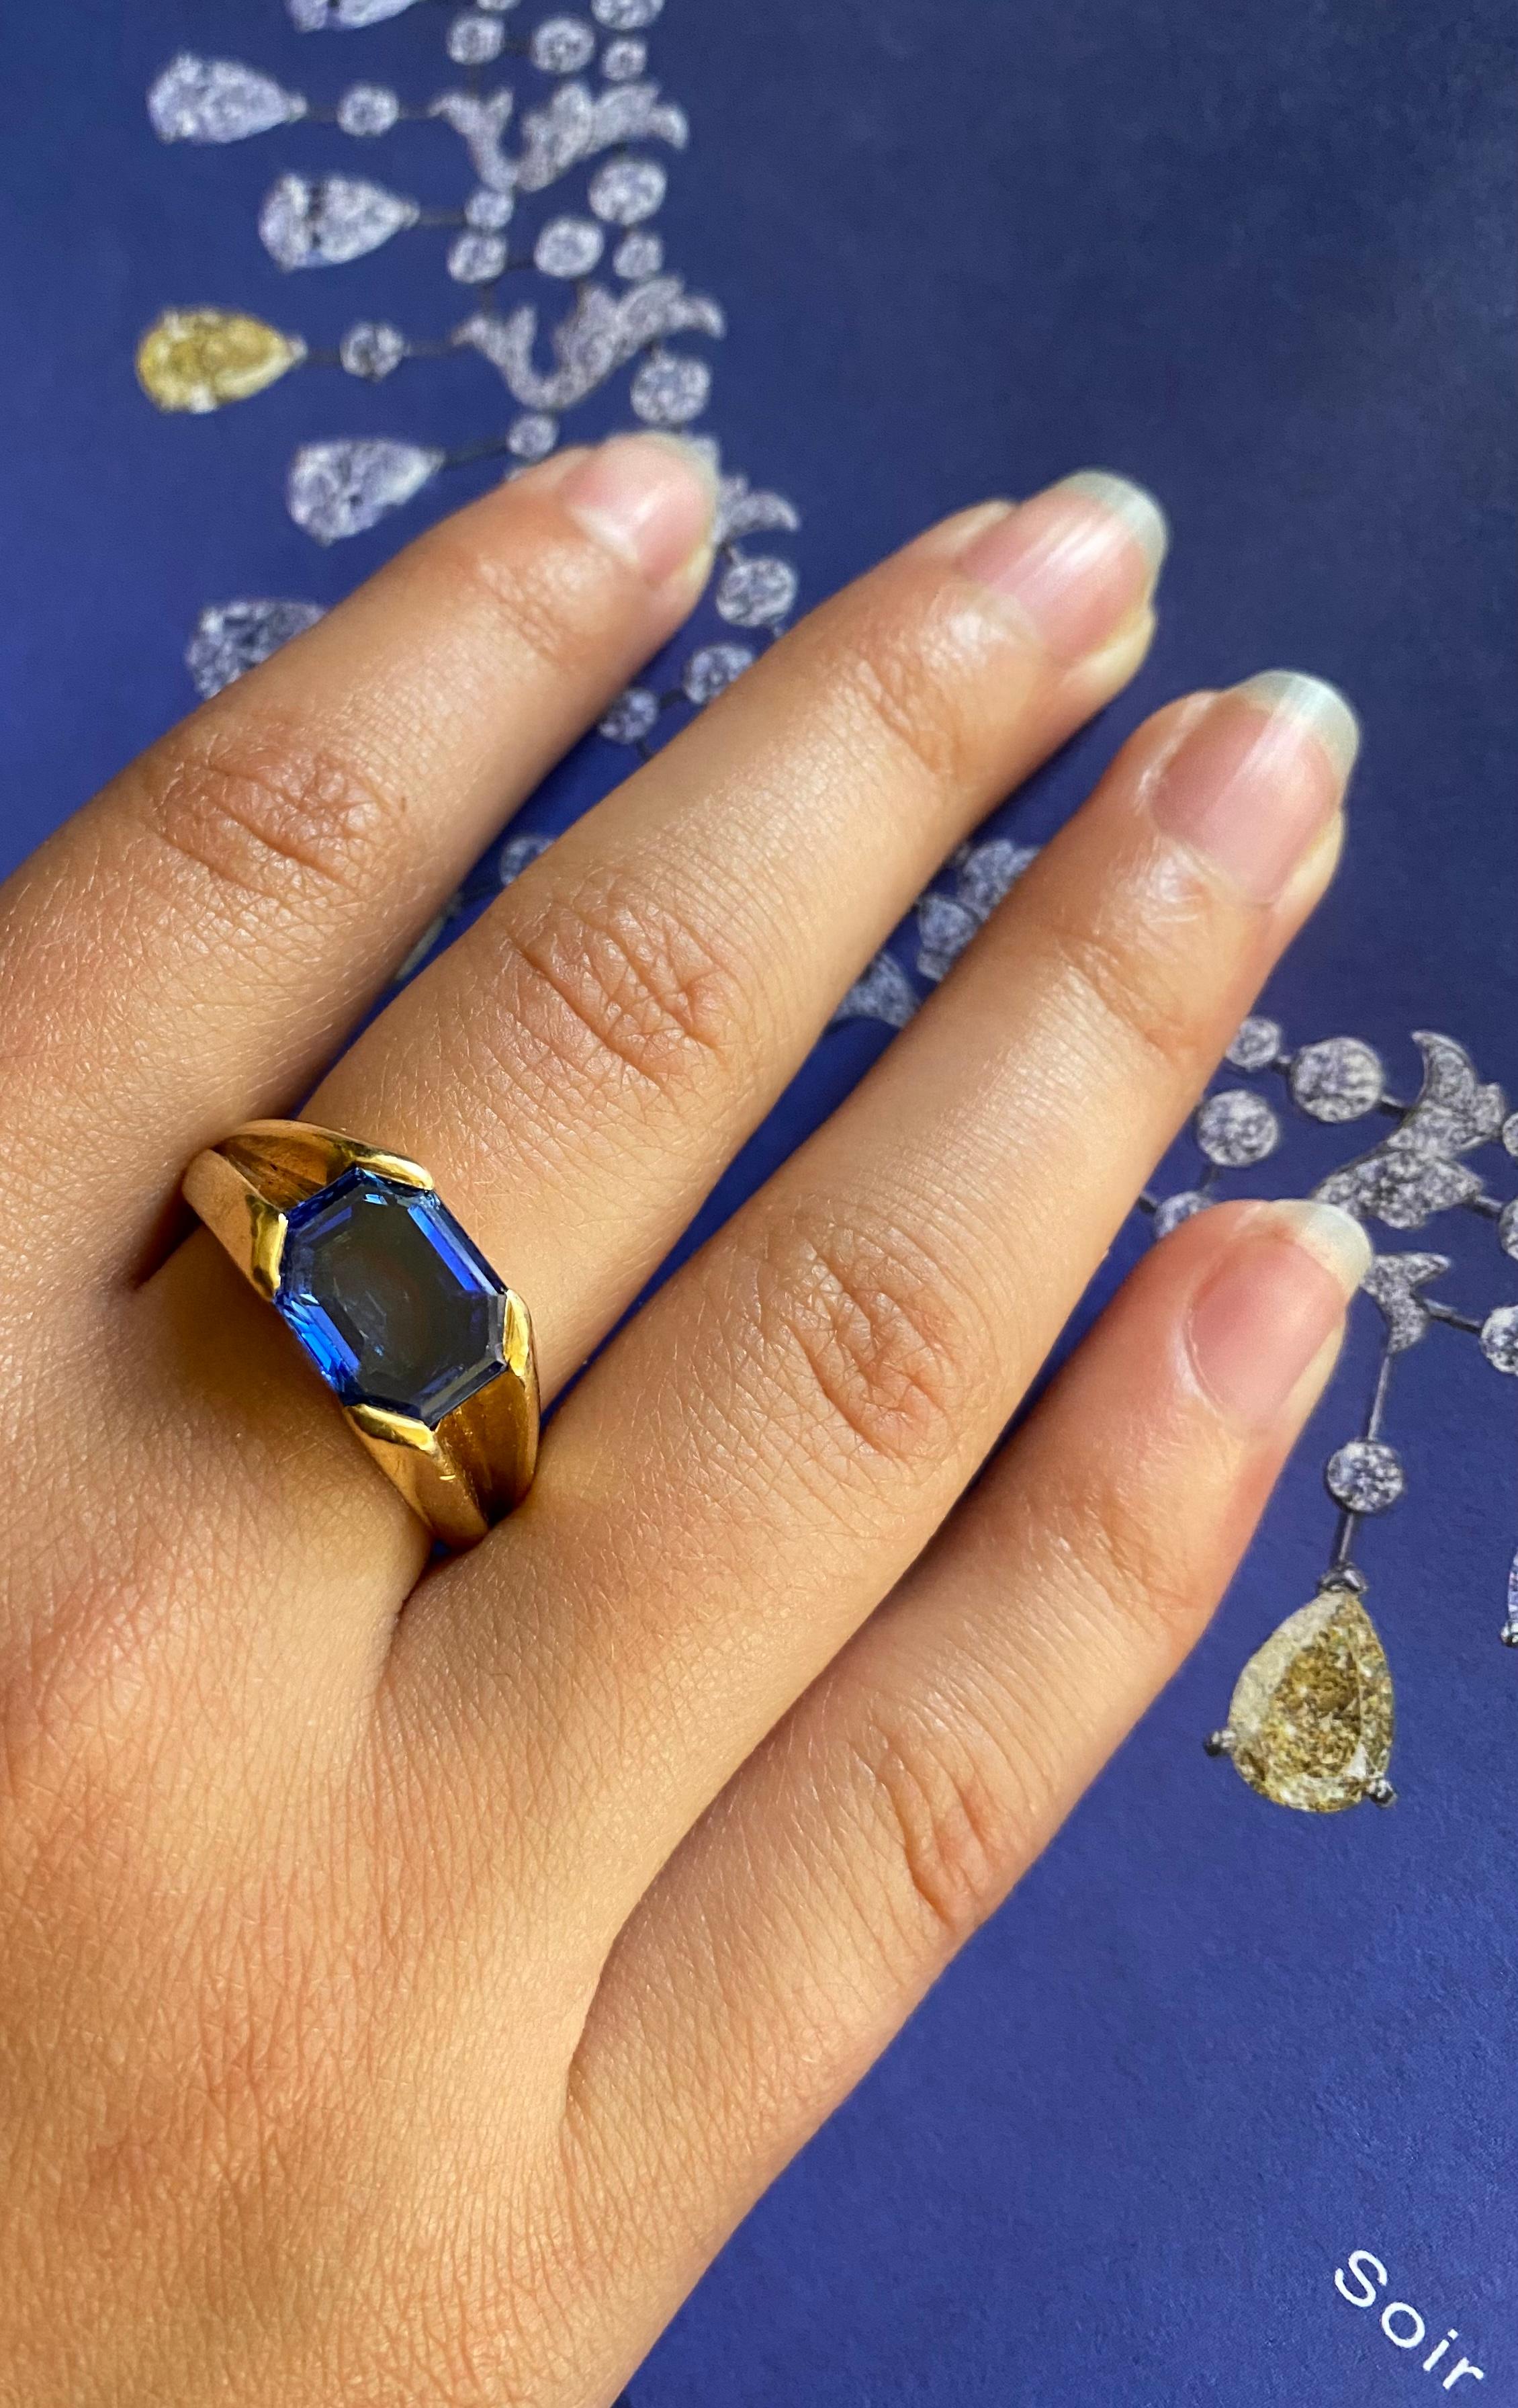 Exquisite Art Deco Cartier Natural Burmese sapphire ring. 
1930's
Octagonal Step Cut Sapphire measuring 11.42 by 9.05 by 4.57, 4.76 Carat. This rarely seen and highly desirable cut gives the sapphire a large, impressive, elegant appearance,